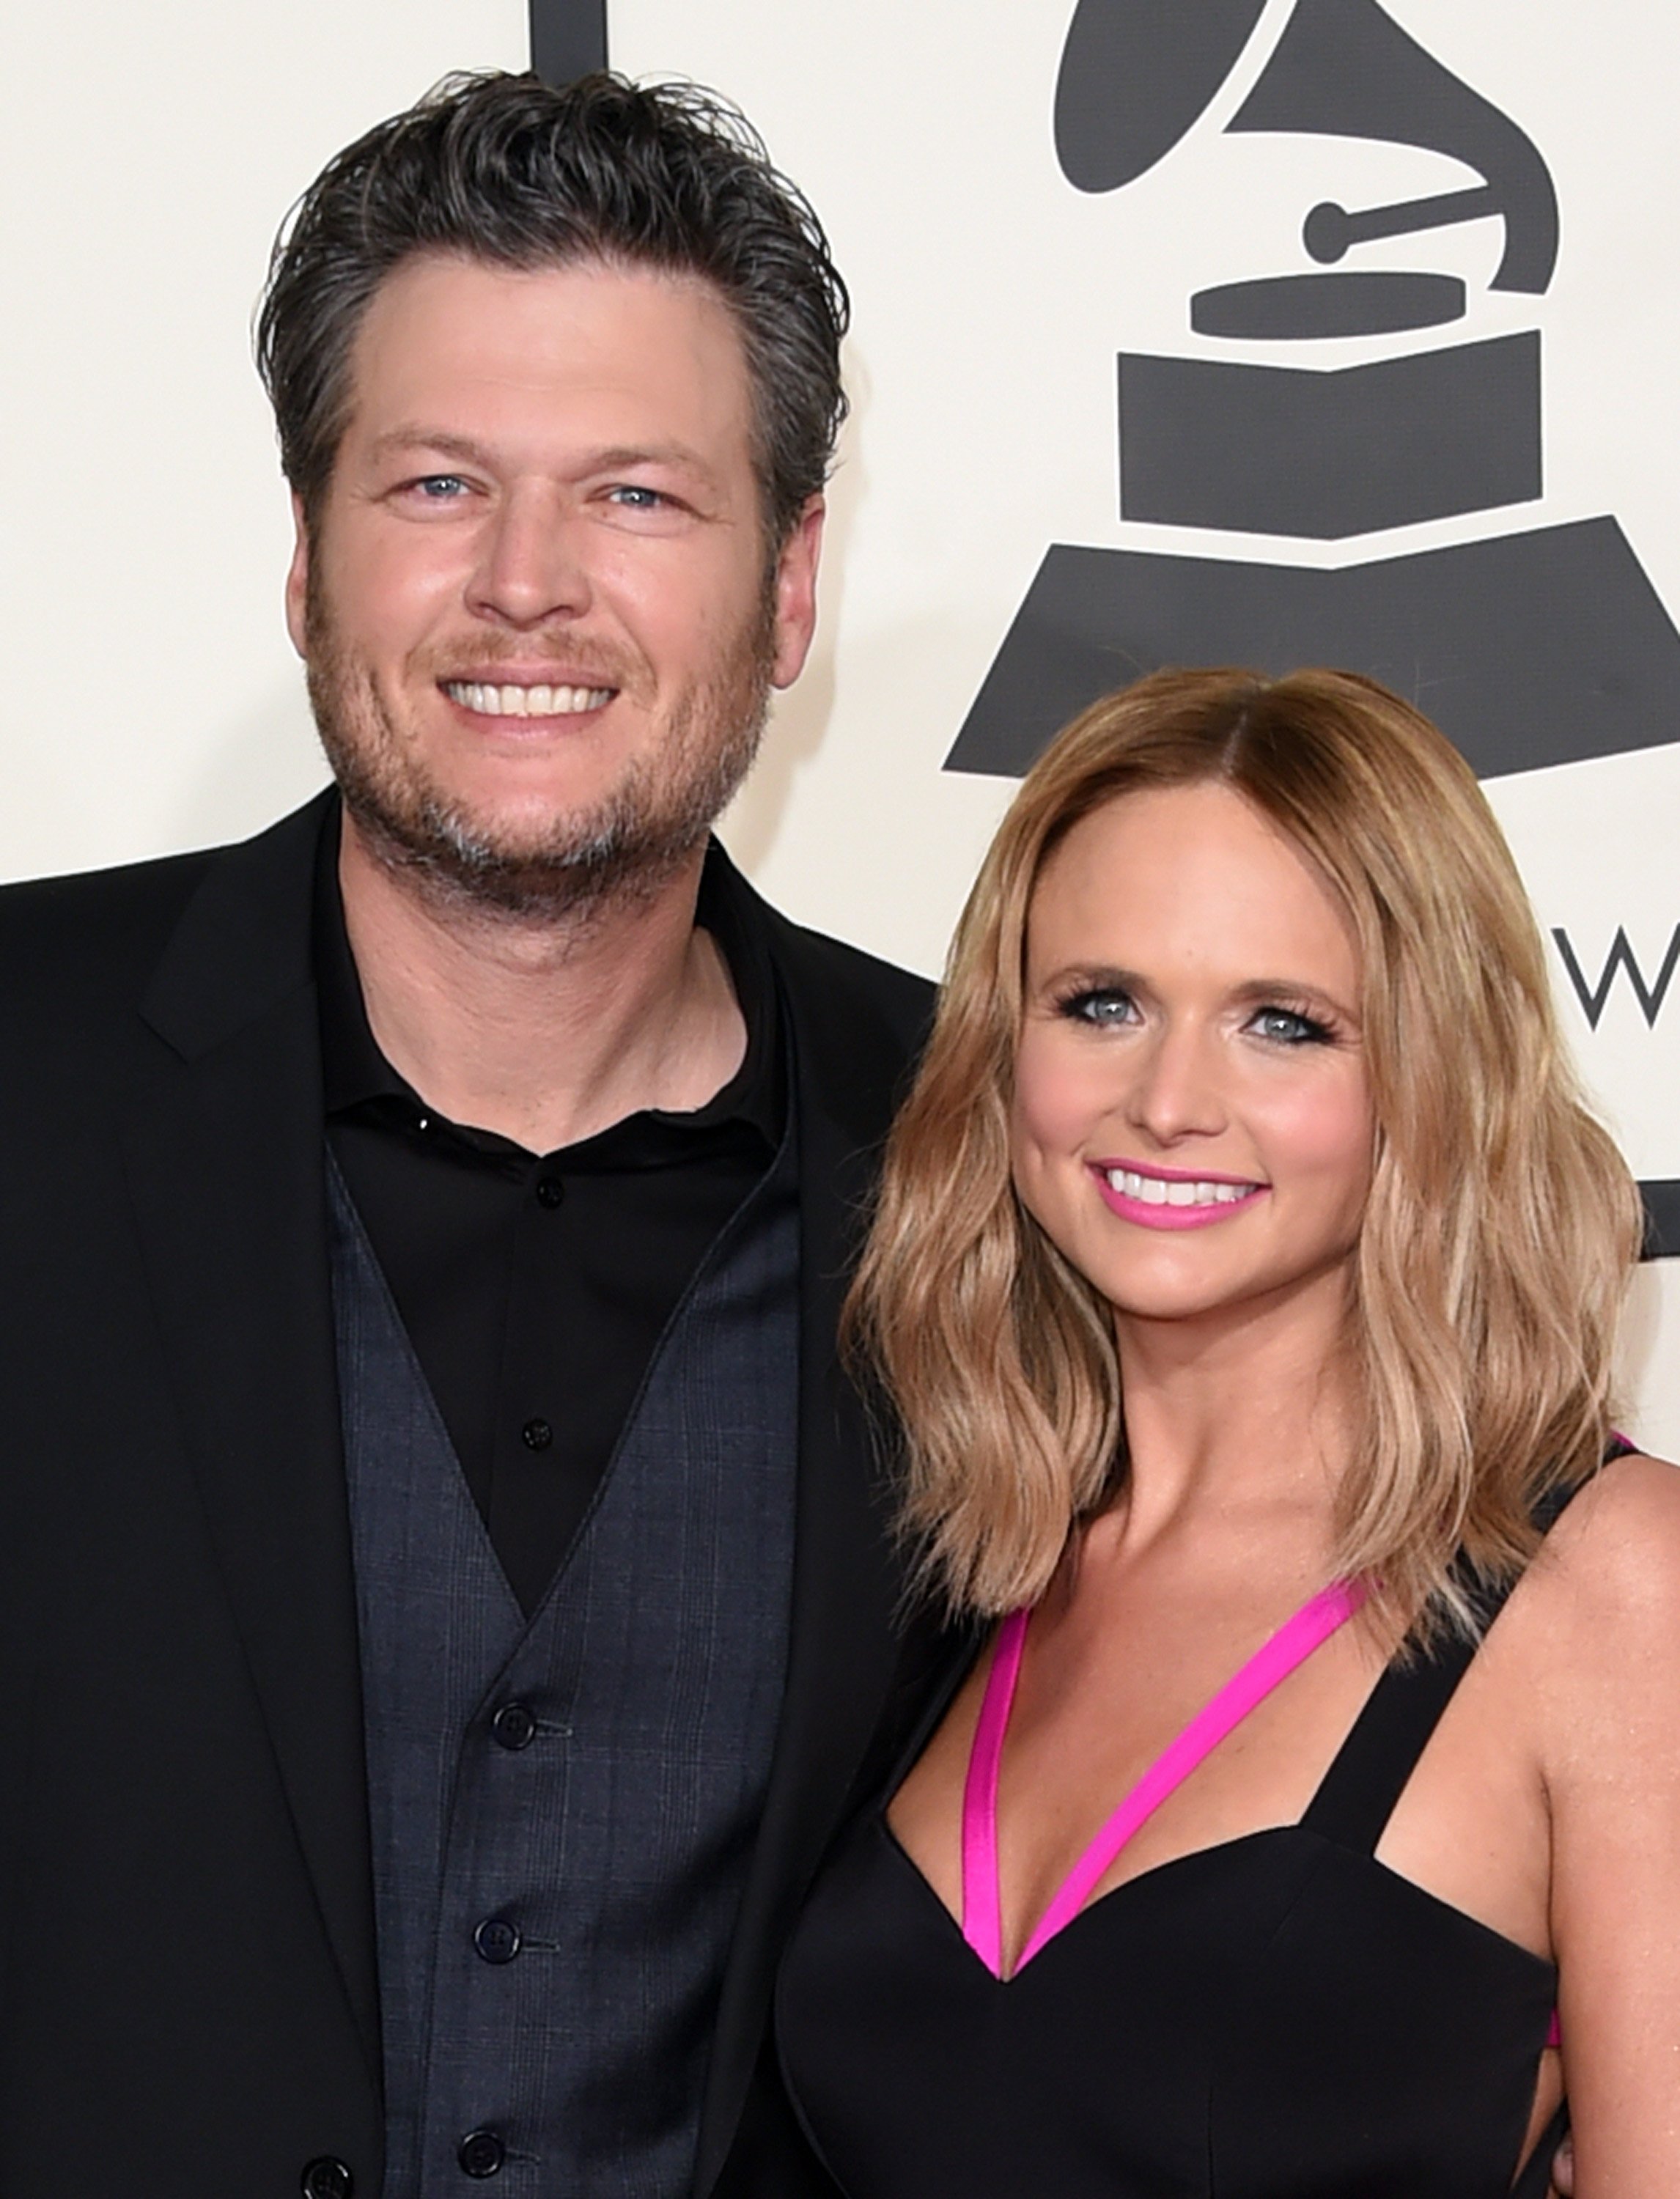  Blake Shelton (L) and Miranda Lambert attend The 57th Annual GRAMMY Awards at the STAPLES Center on February 8, 2015 | Photo: Getty Images